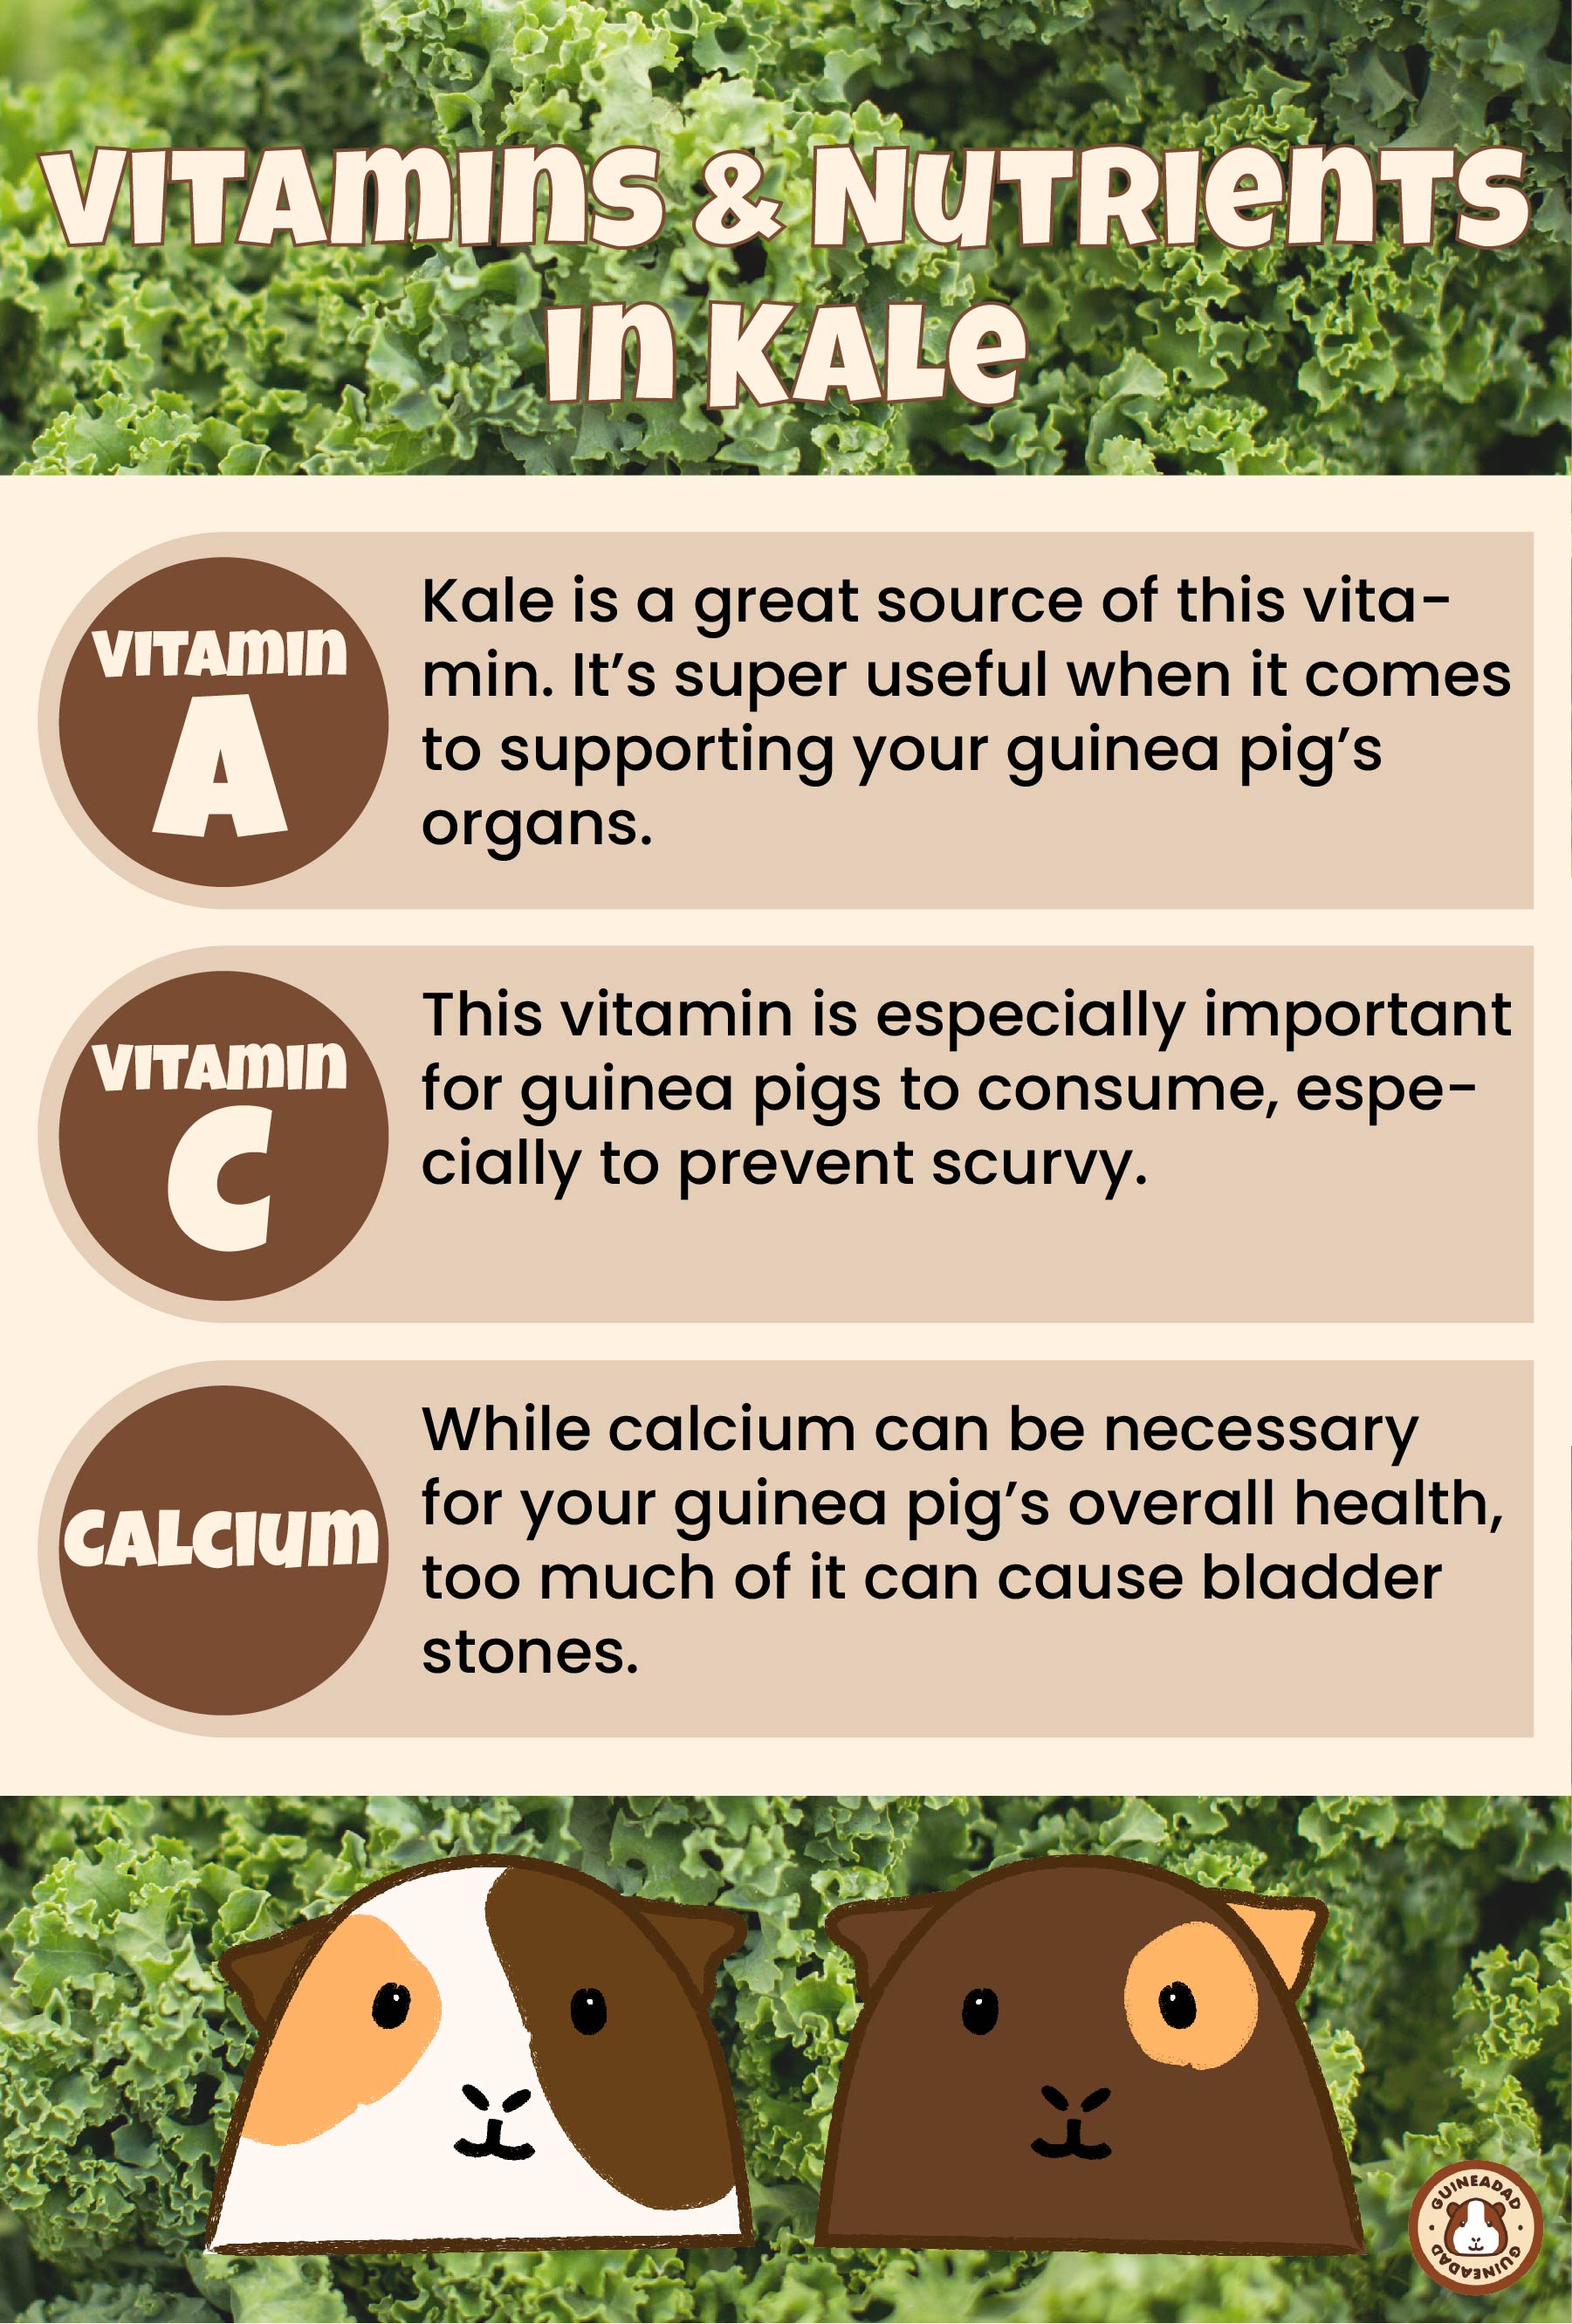 Infographic displaying the vitamins and nutrients in kale for guinea pigs